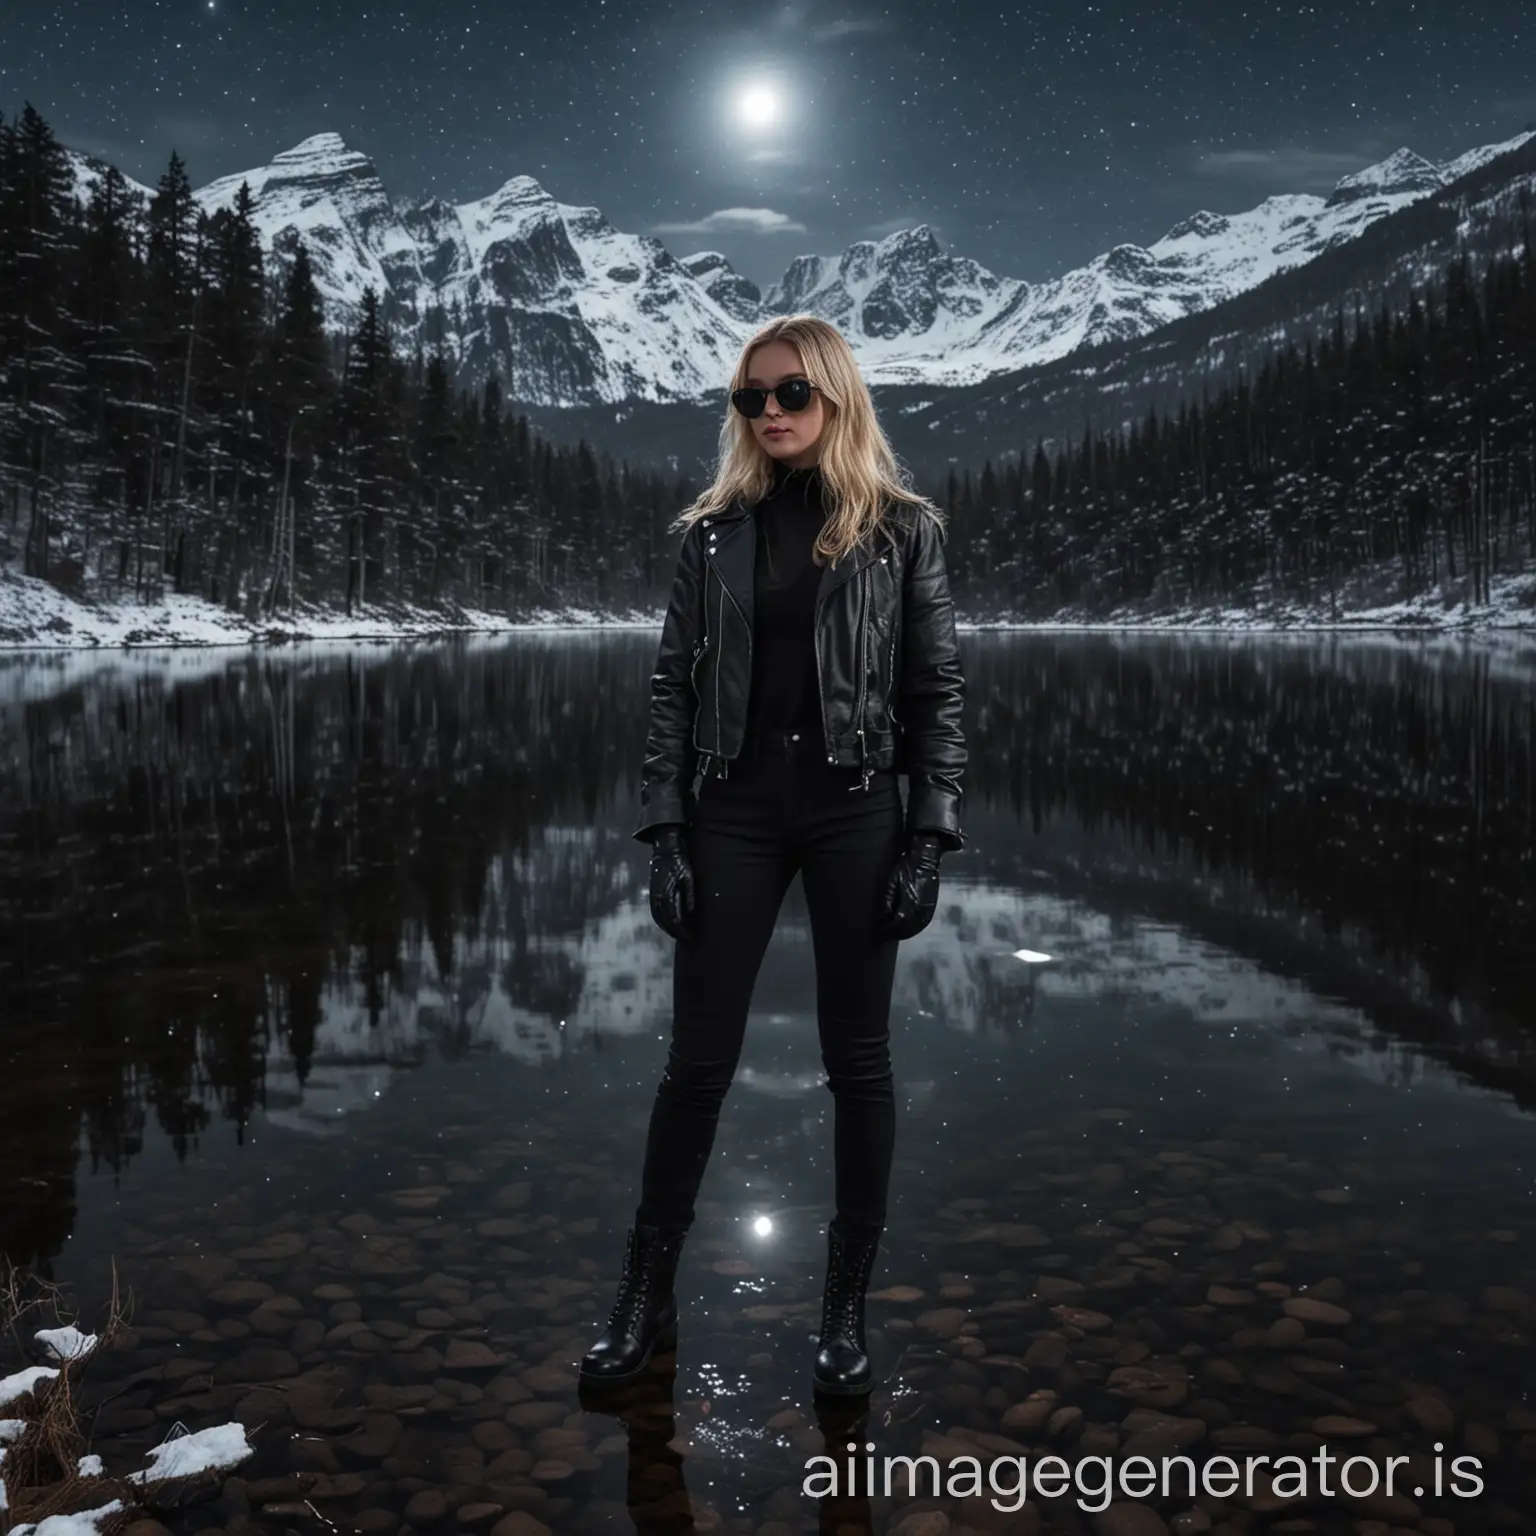 A young blonde girl of 19, wearing black pants, a black jacket, black sunglasses, black gloves and black ankle boots, stands in front of a lake in a dark forest at night. A snow-covered mountain is in the background. The moon and stars are visible in the sky.